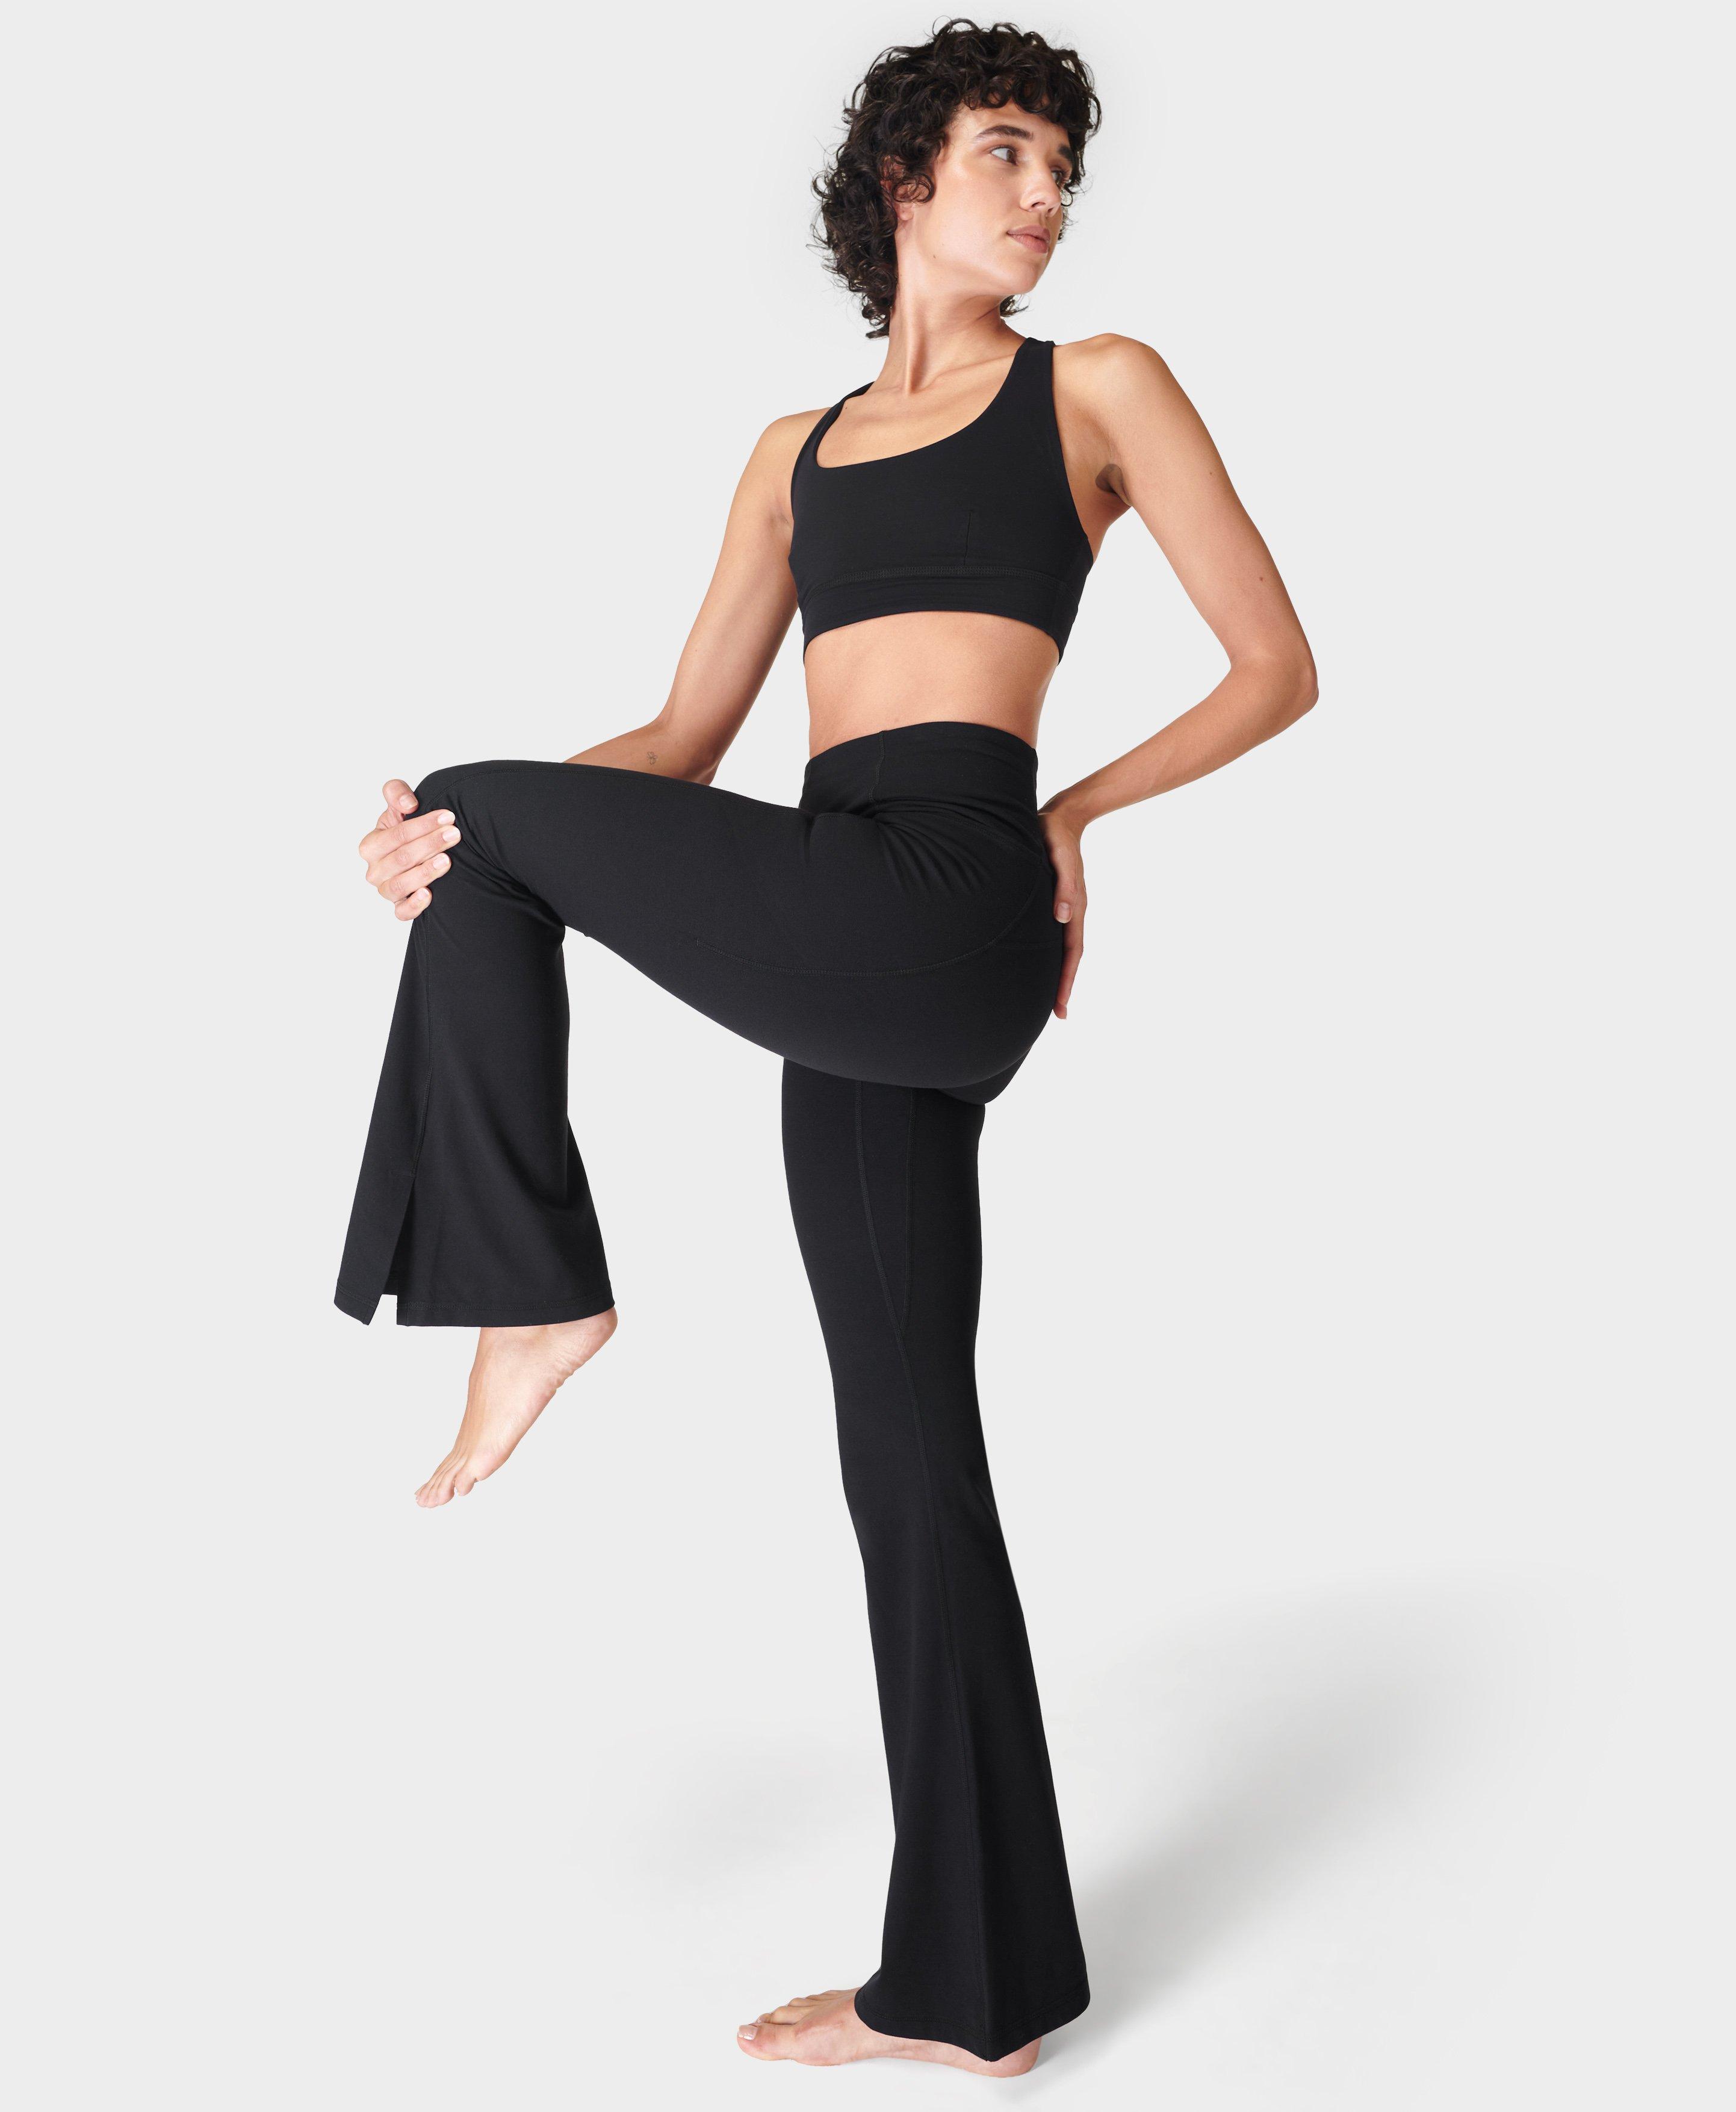  Uillui Flare Pants for Women Gym Athletic Yoga Tights  Sweatpants High Waist Stretch Casual Bell Bottom Trouser Homewear Pant  Black : Clothing, Shoes & Jewelry